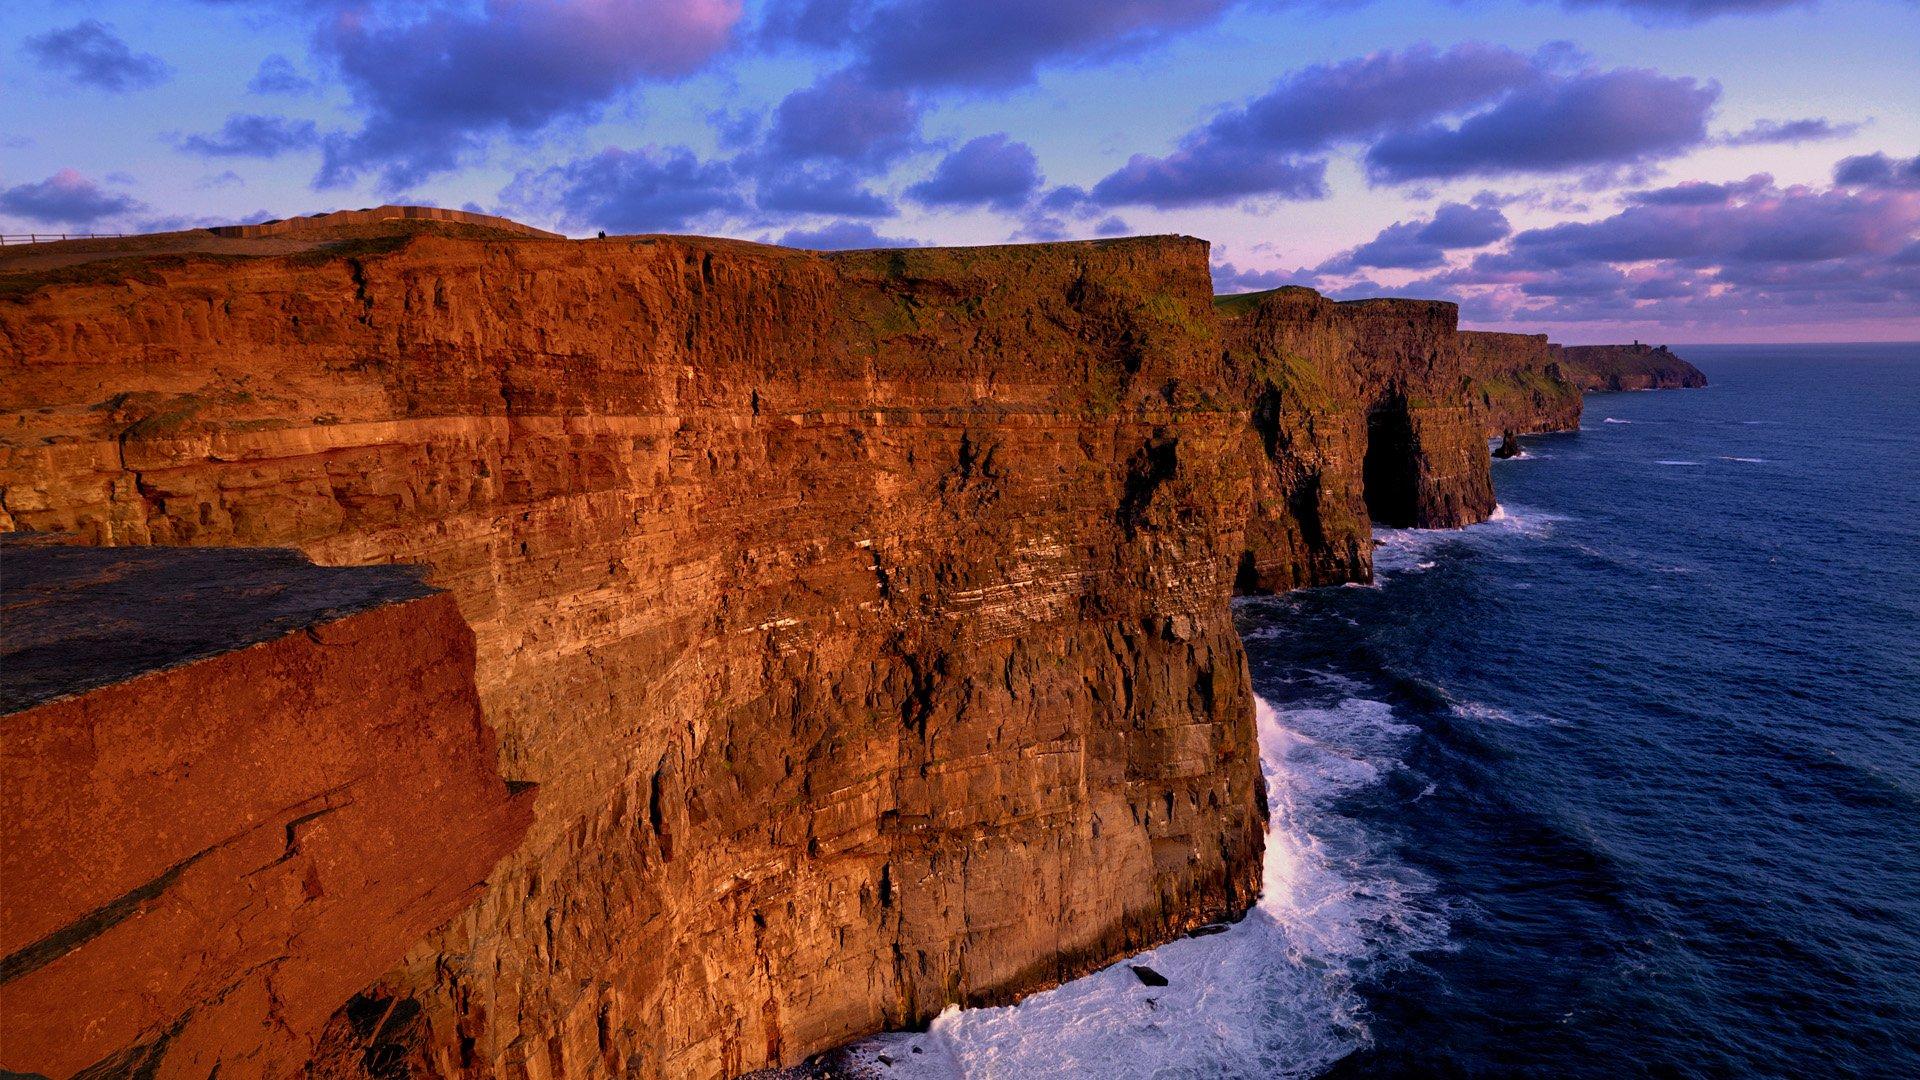 Sunset at the Cliffs of Moher, Ireland HD Wallpaper. Background